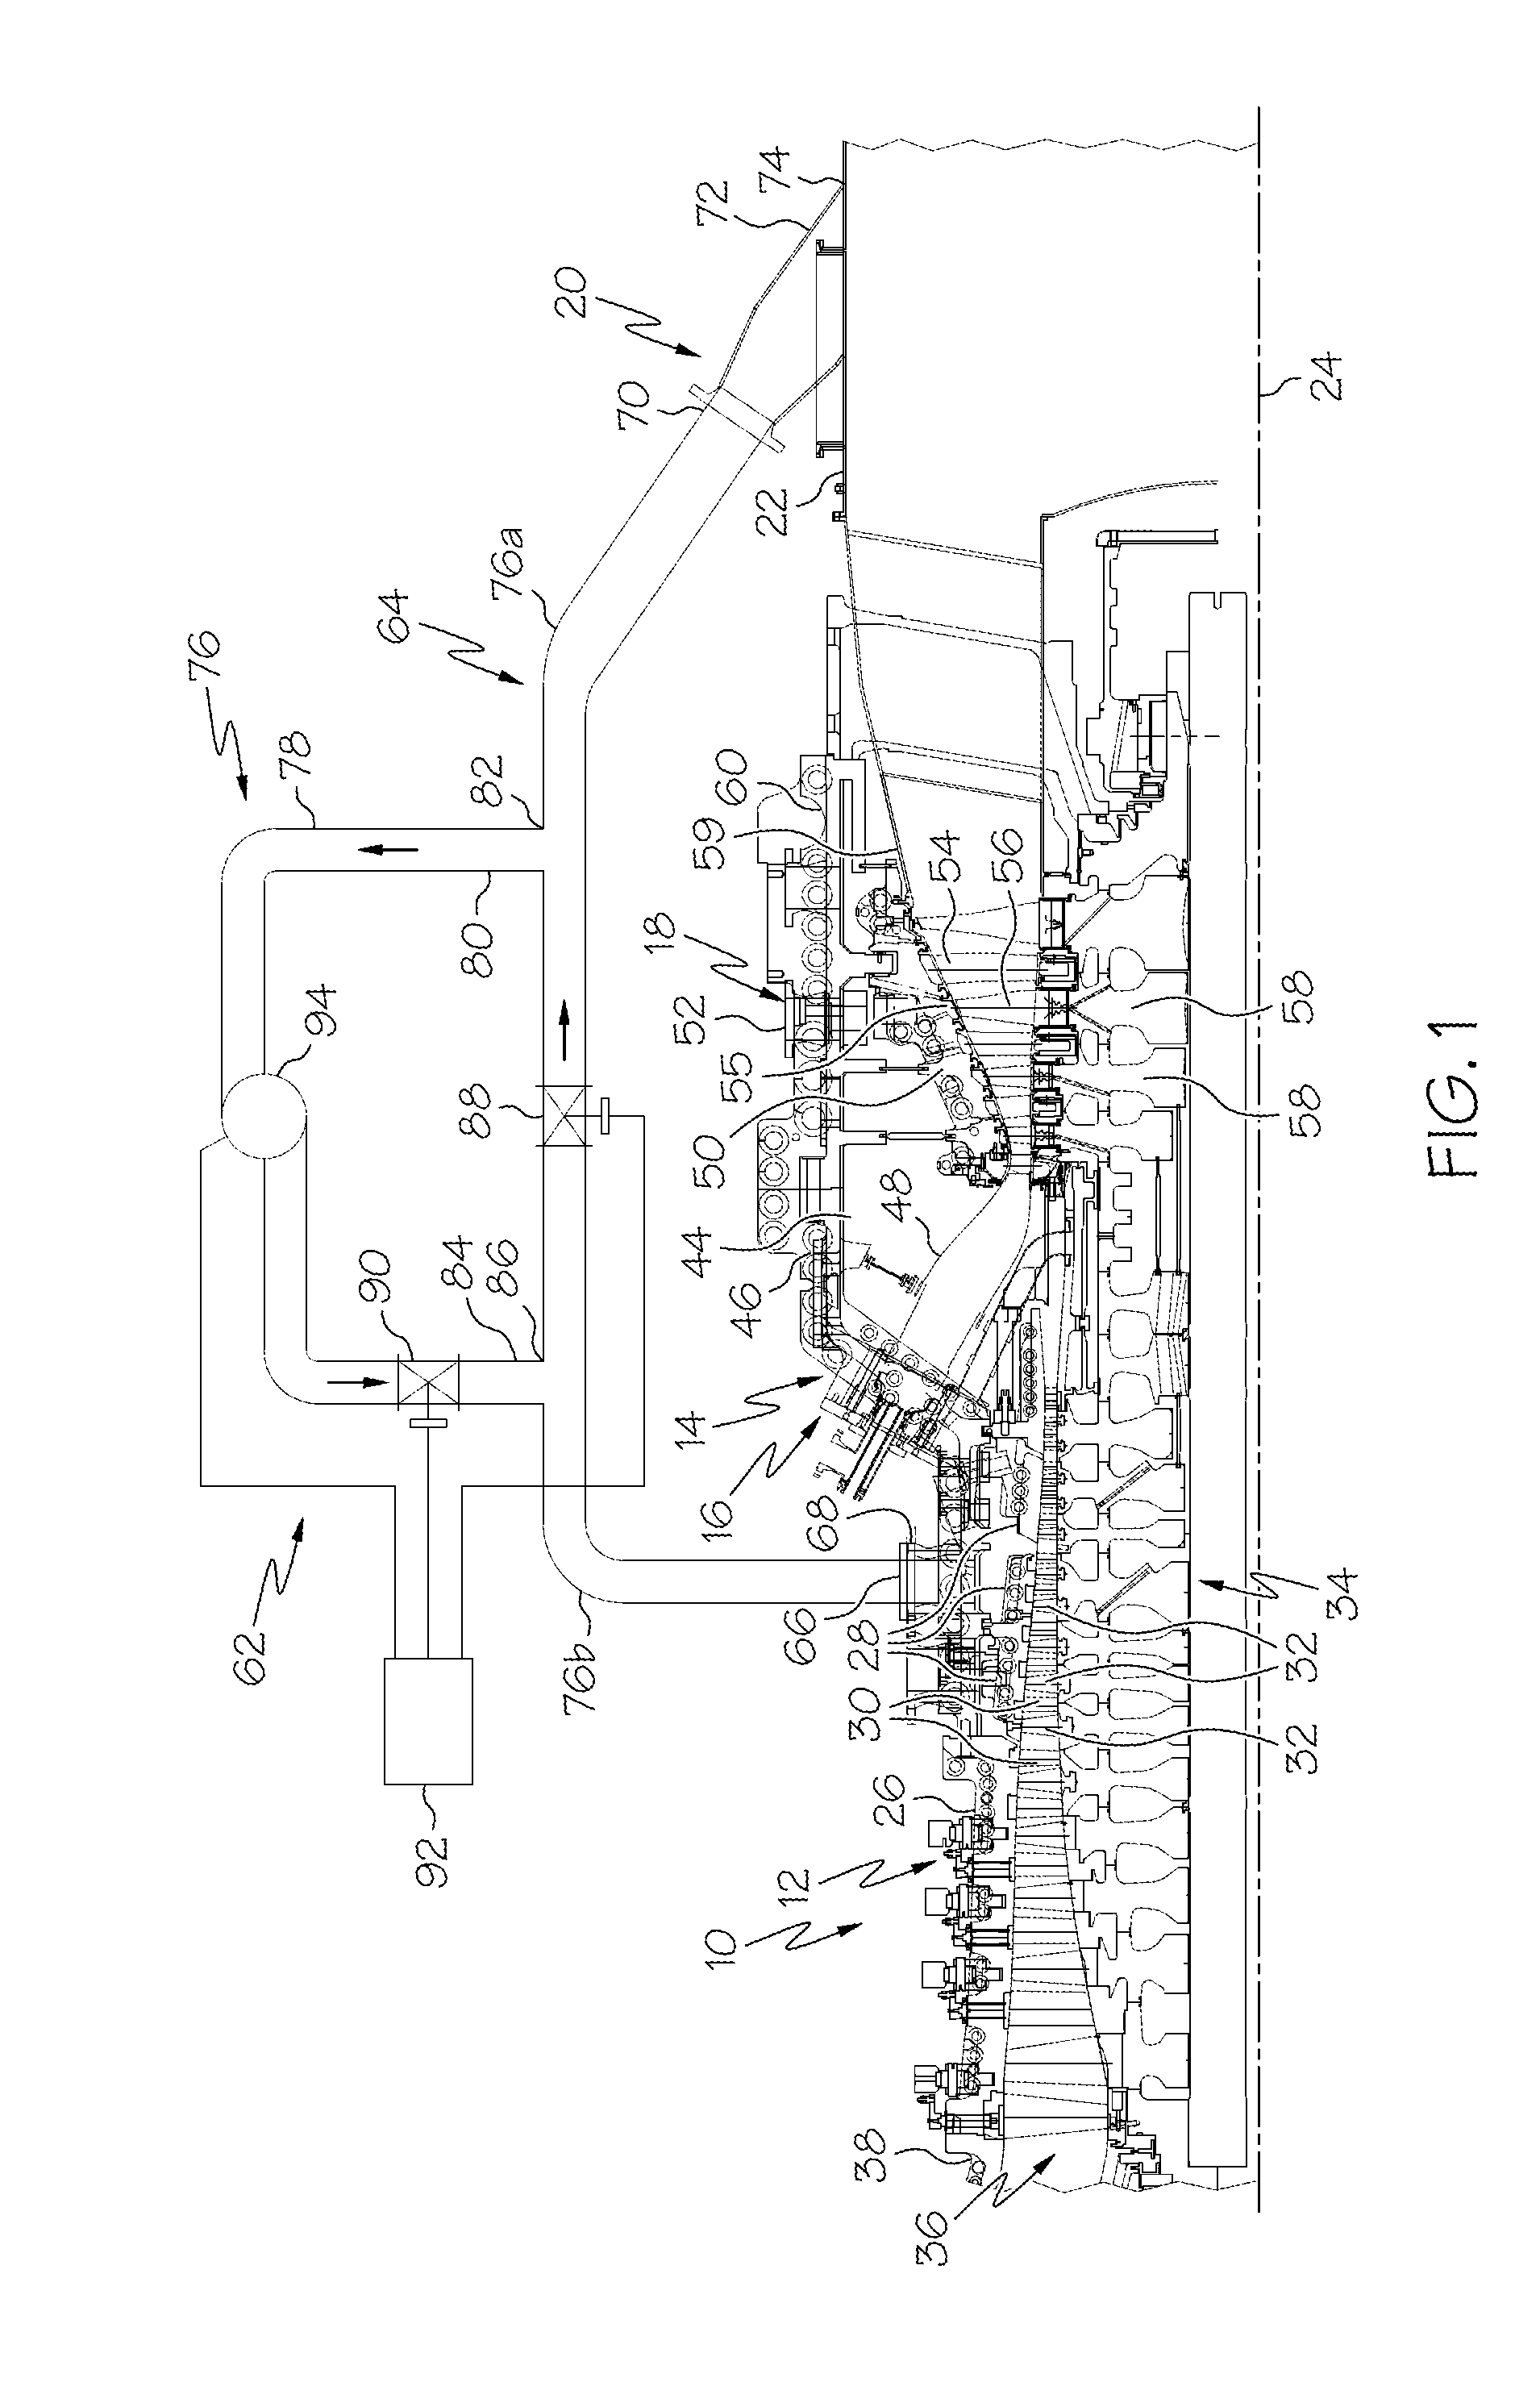 Heat retention and distribution system for gas turbine engines